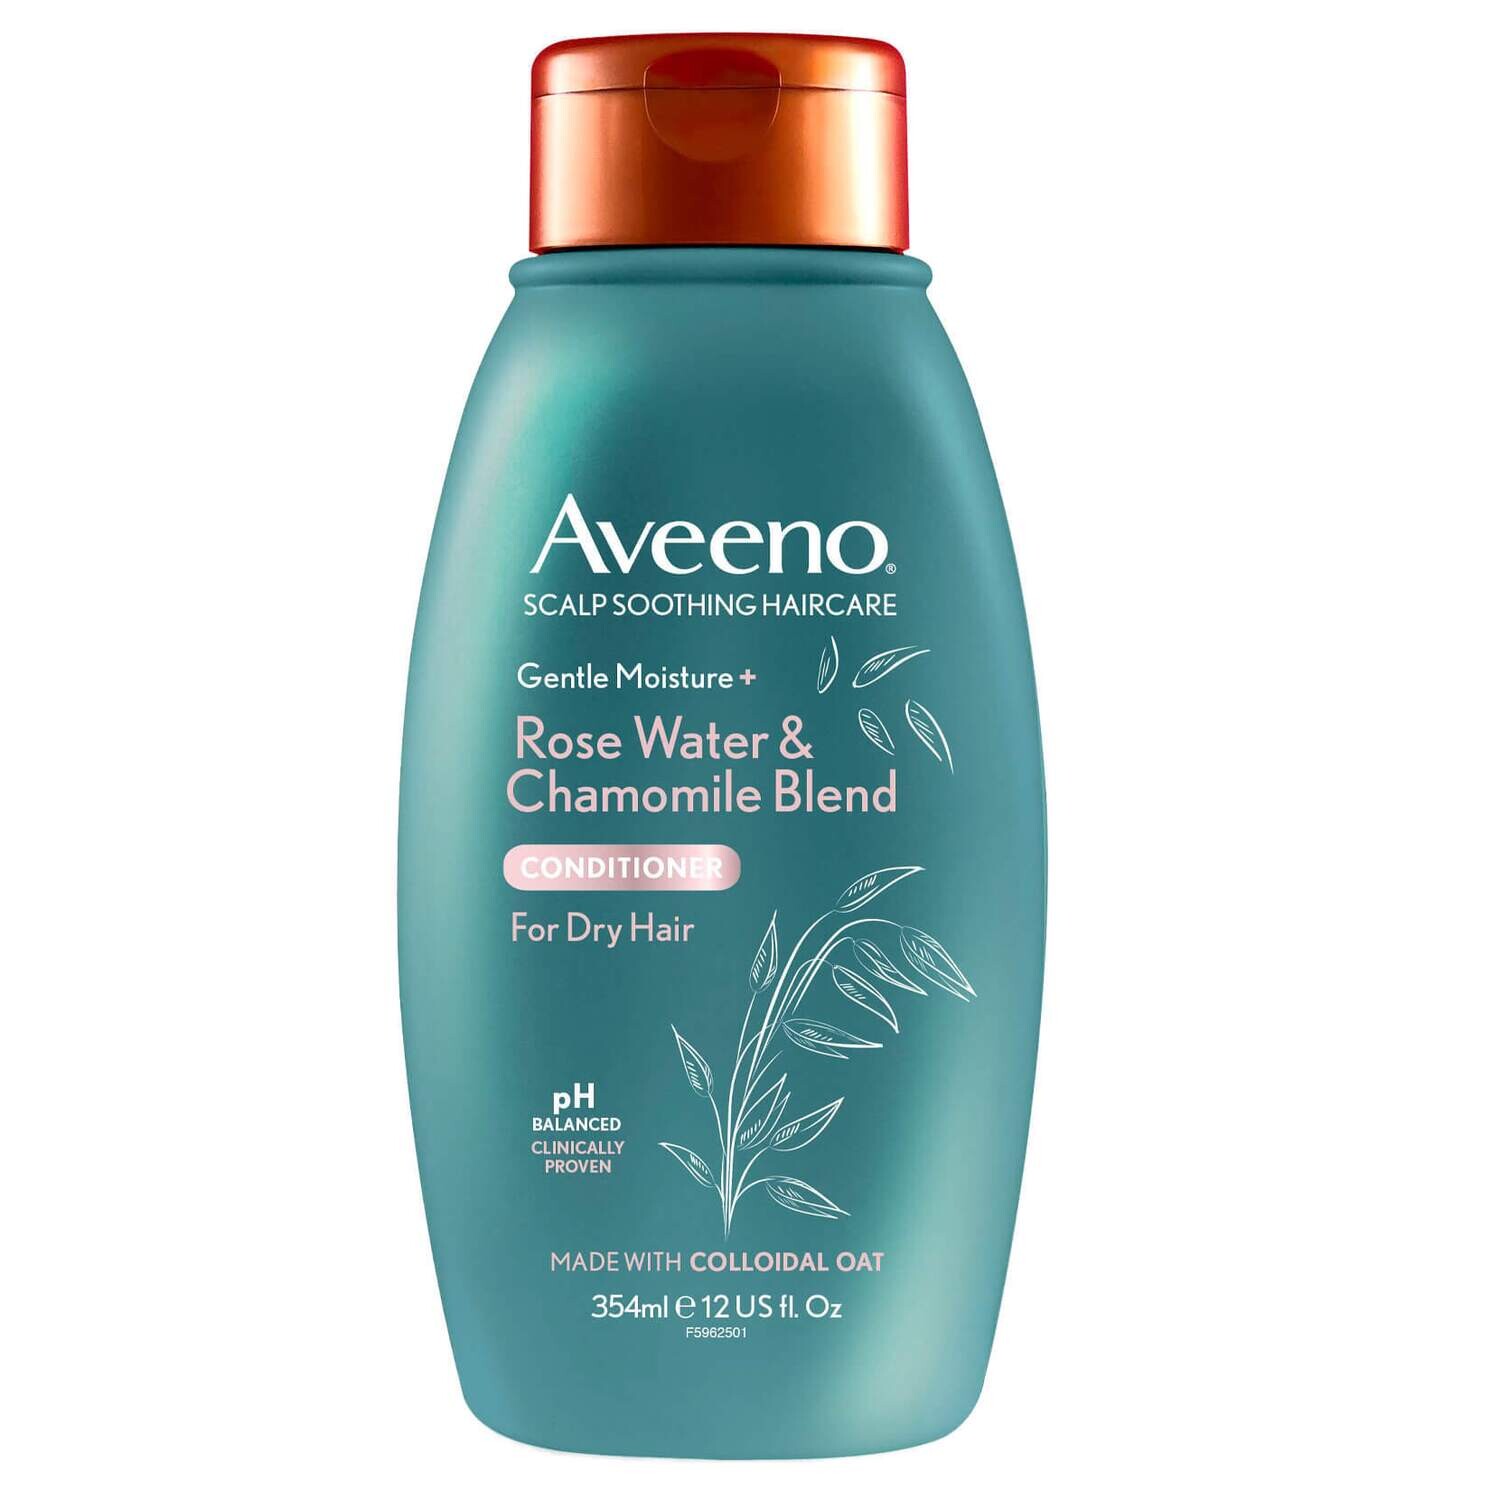 AVEENO ROSE WATER & CHAMOMILE BLEND CONDITIONER